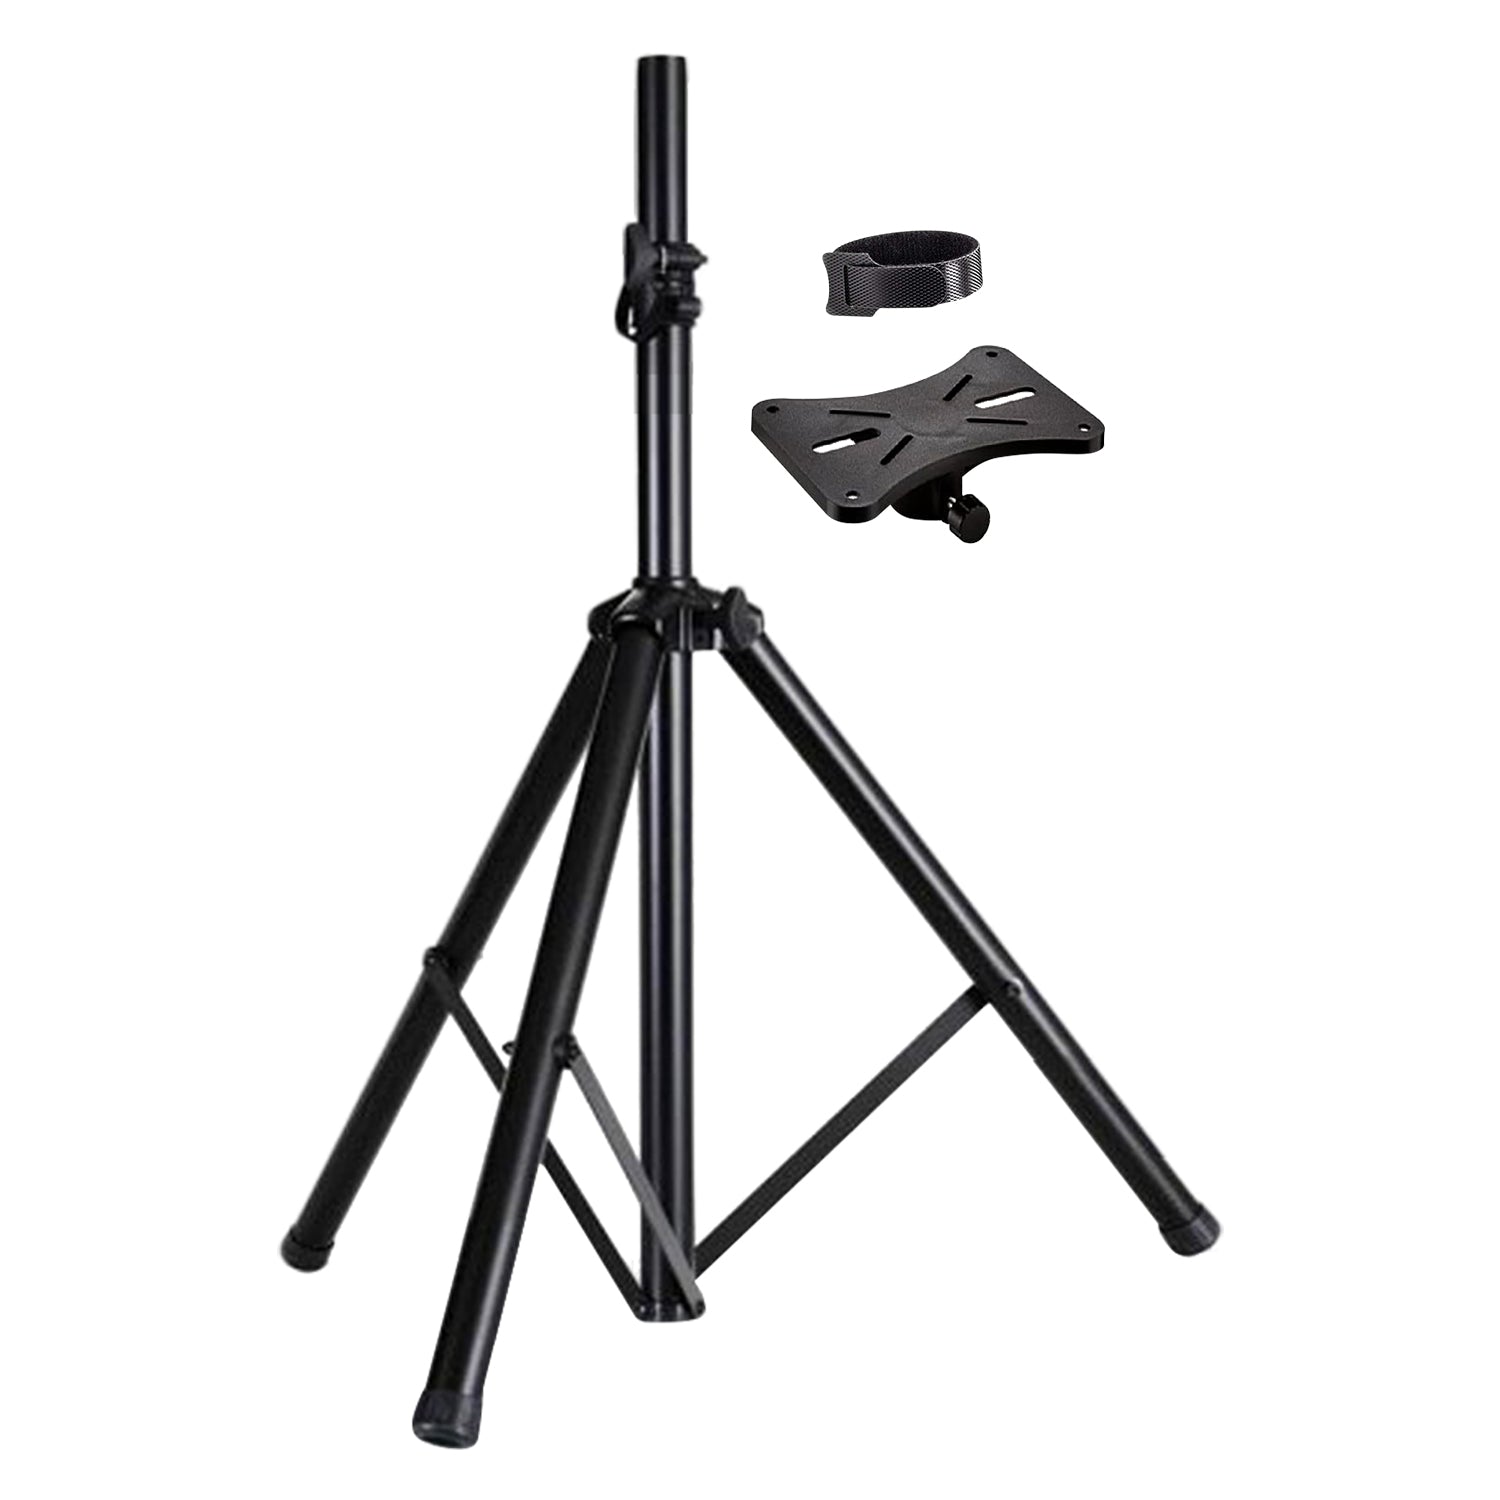 5 Core PA Speaker Stand Universal for Large Speakers Black 4FT Tripod Speaker Stand Height Adjustable from 68 to 128 CM onstage heavy duty Supports 130 lbs- SS HD 1PK 4FT